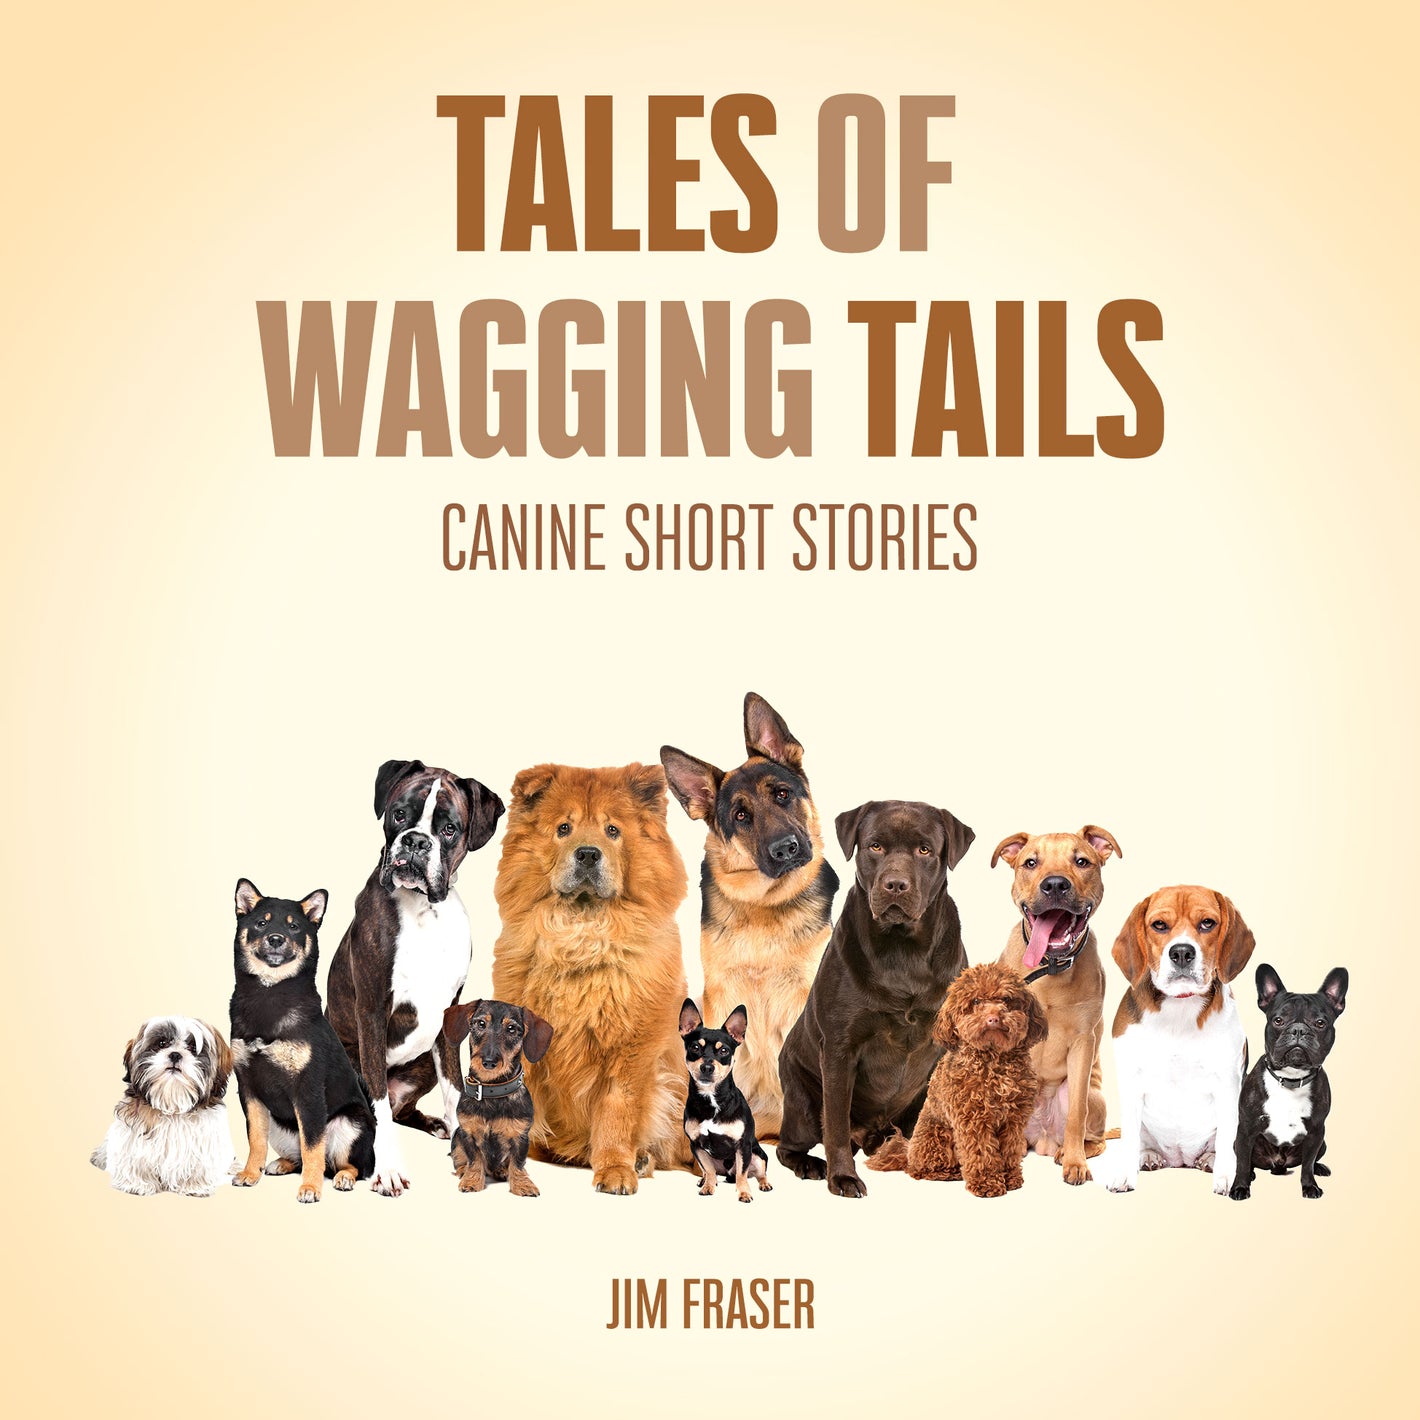 Tales of Wagging Tails - Canine Short Stories